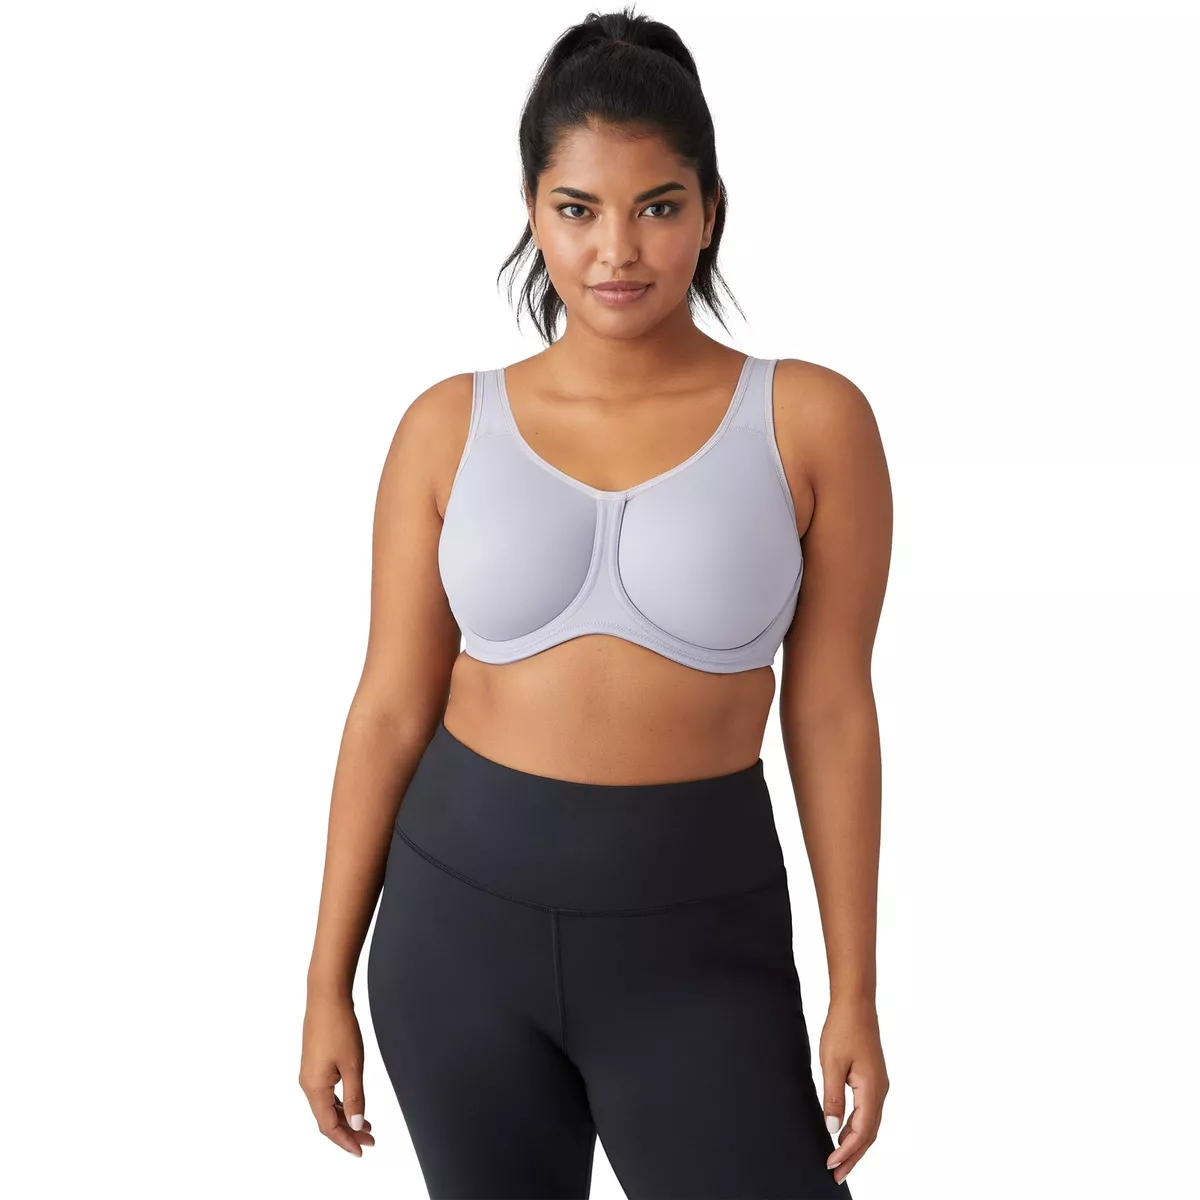 Wacoal 296125 Full Figure Underwire Sports Bra, Lilace Gray With Zephyr,  32G US